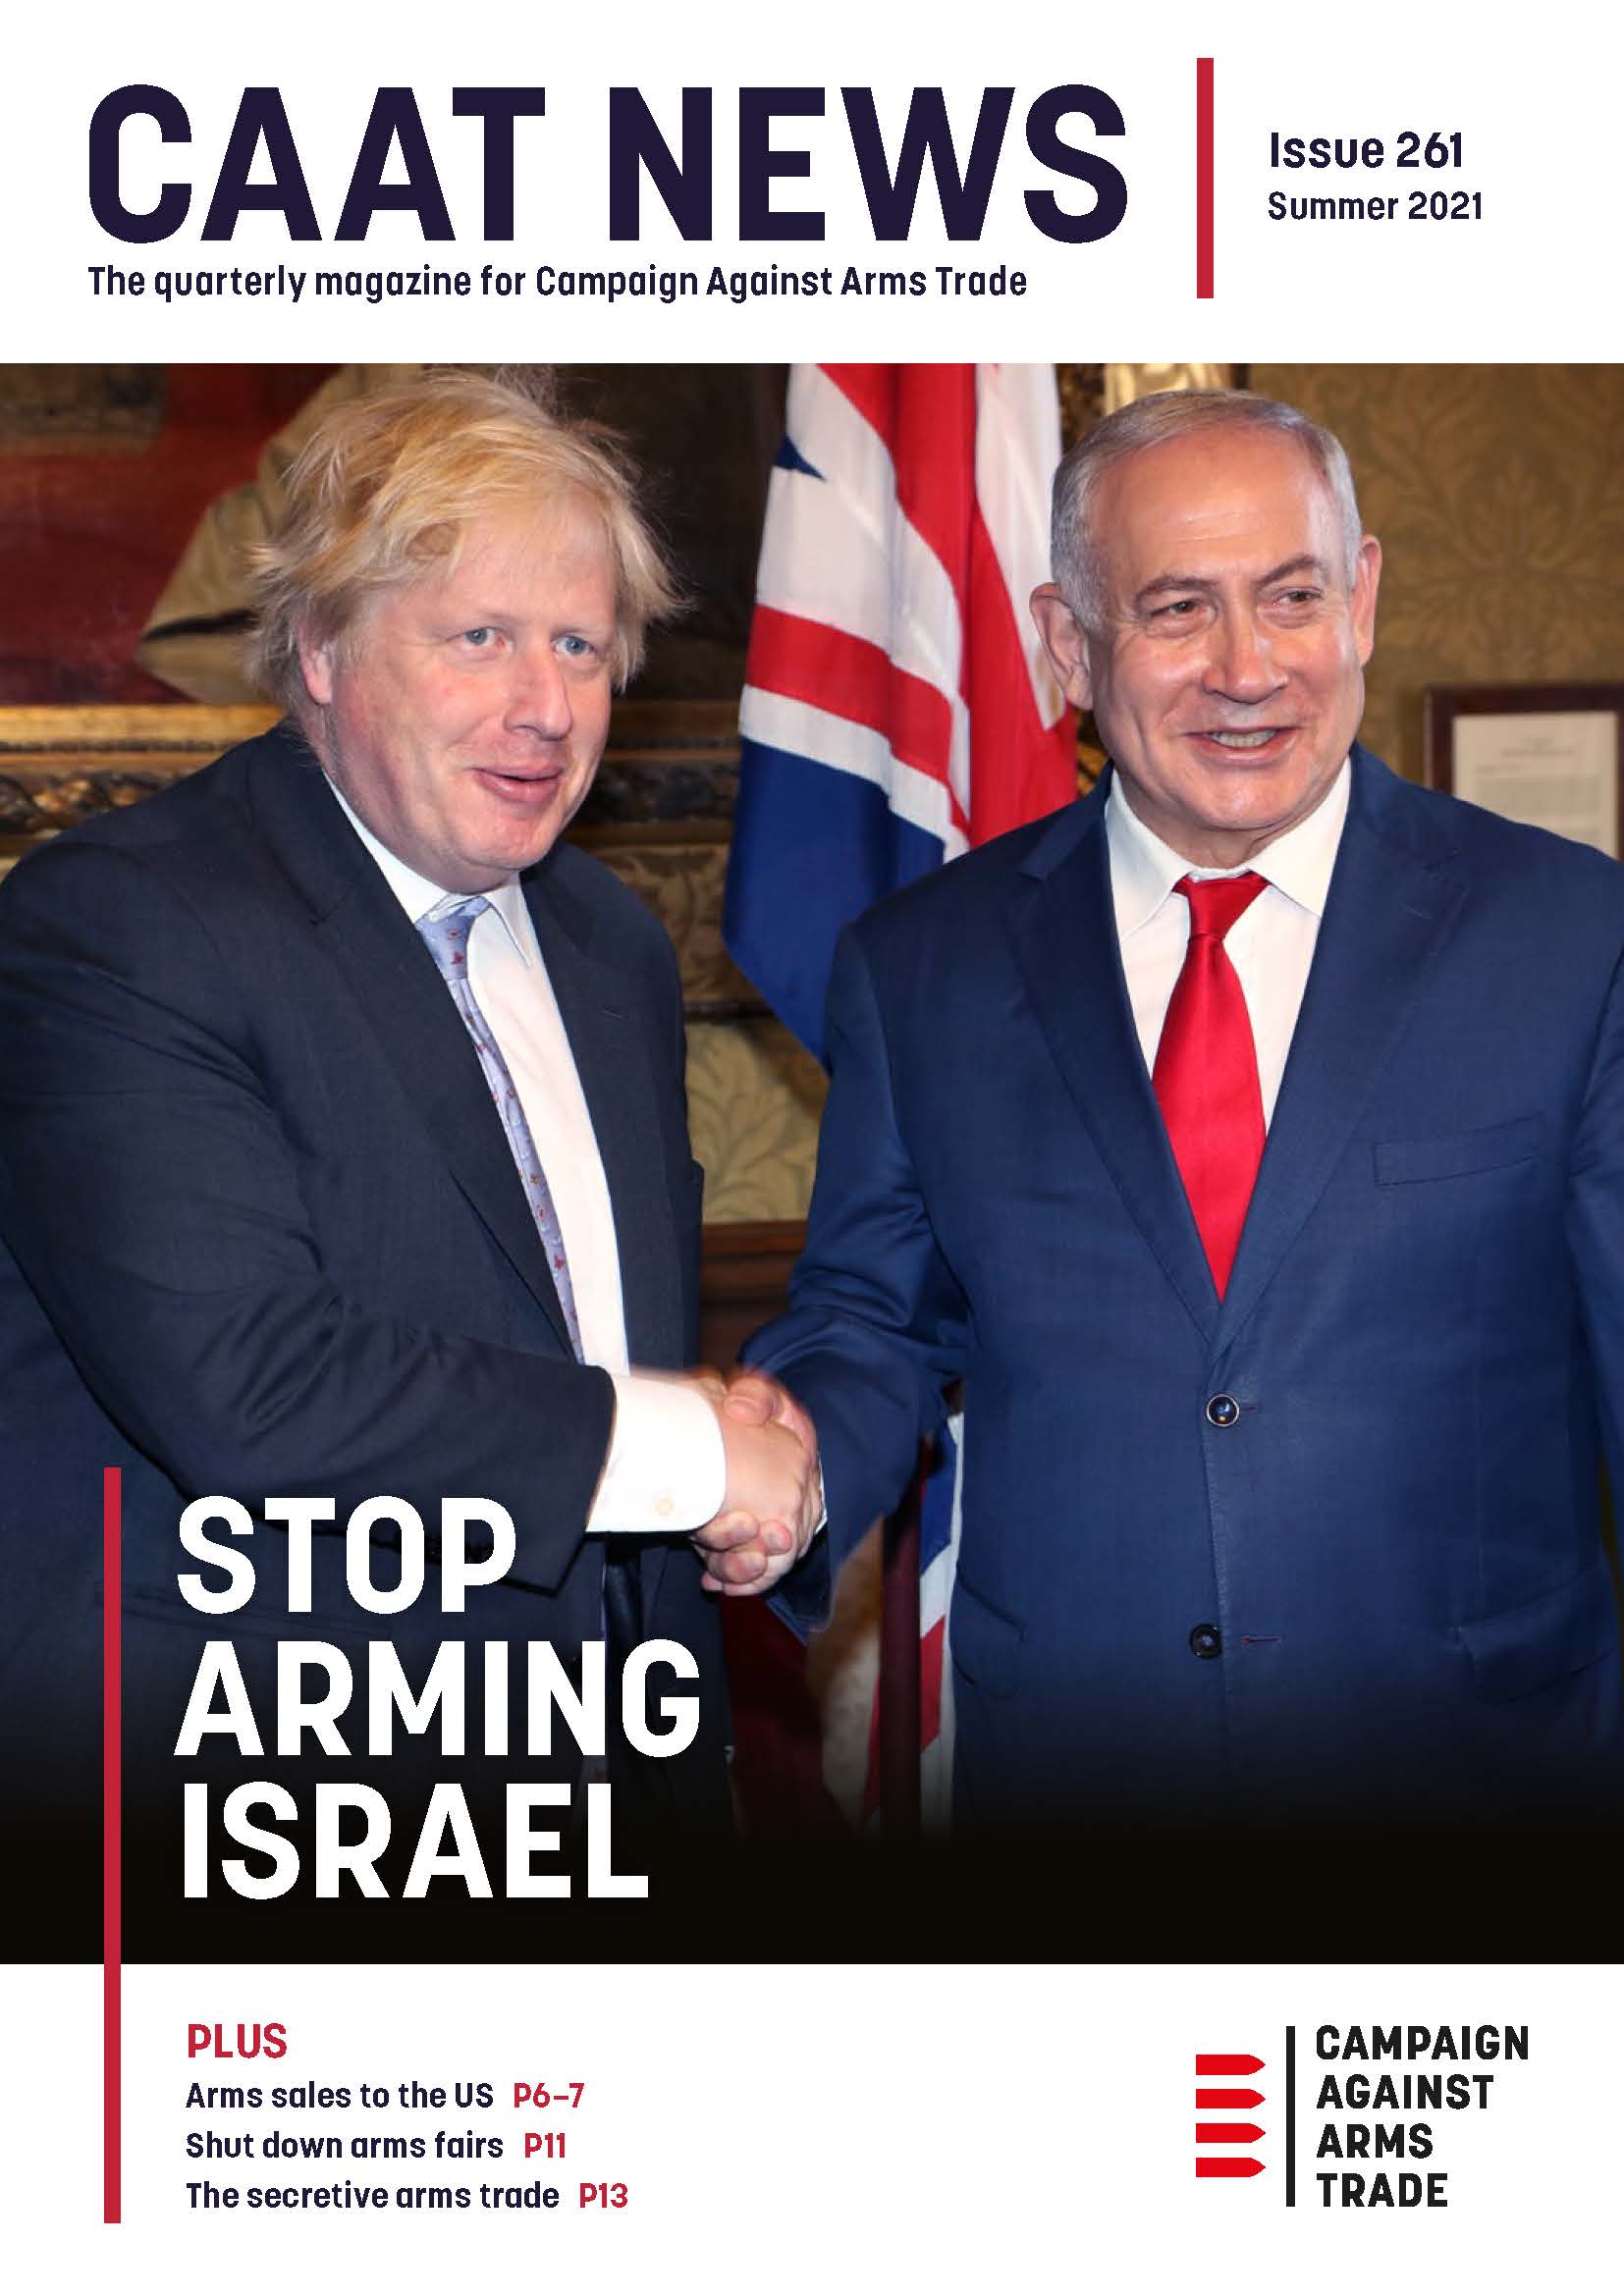 CAAT News cover with banner header, and Image of UK Prime Minister Boris Johnson shaking hands with Israeli Prime Minister Binyamin Netanyahu in front of a UK flag